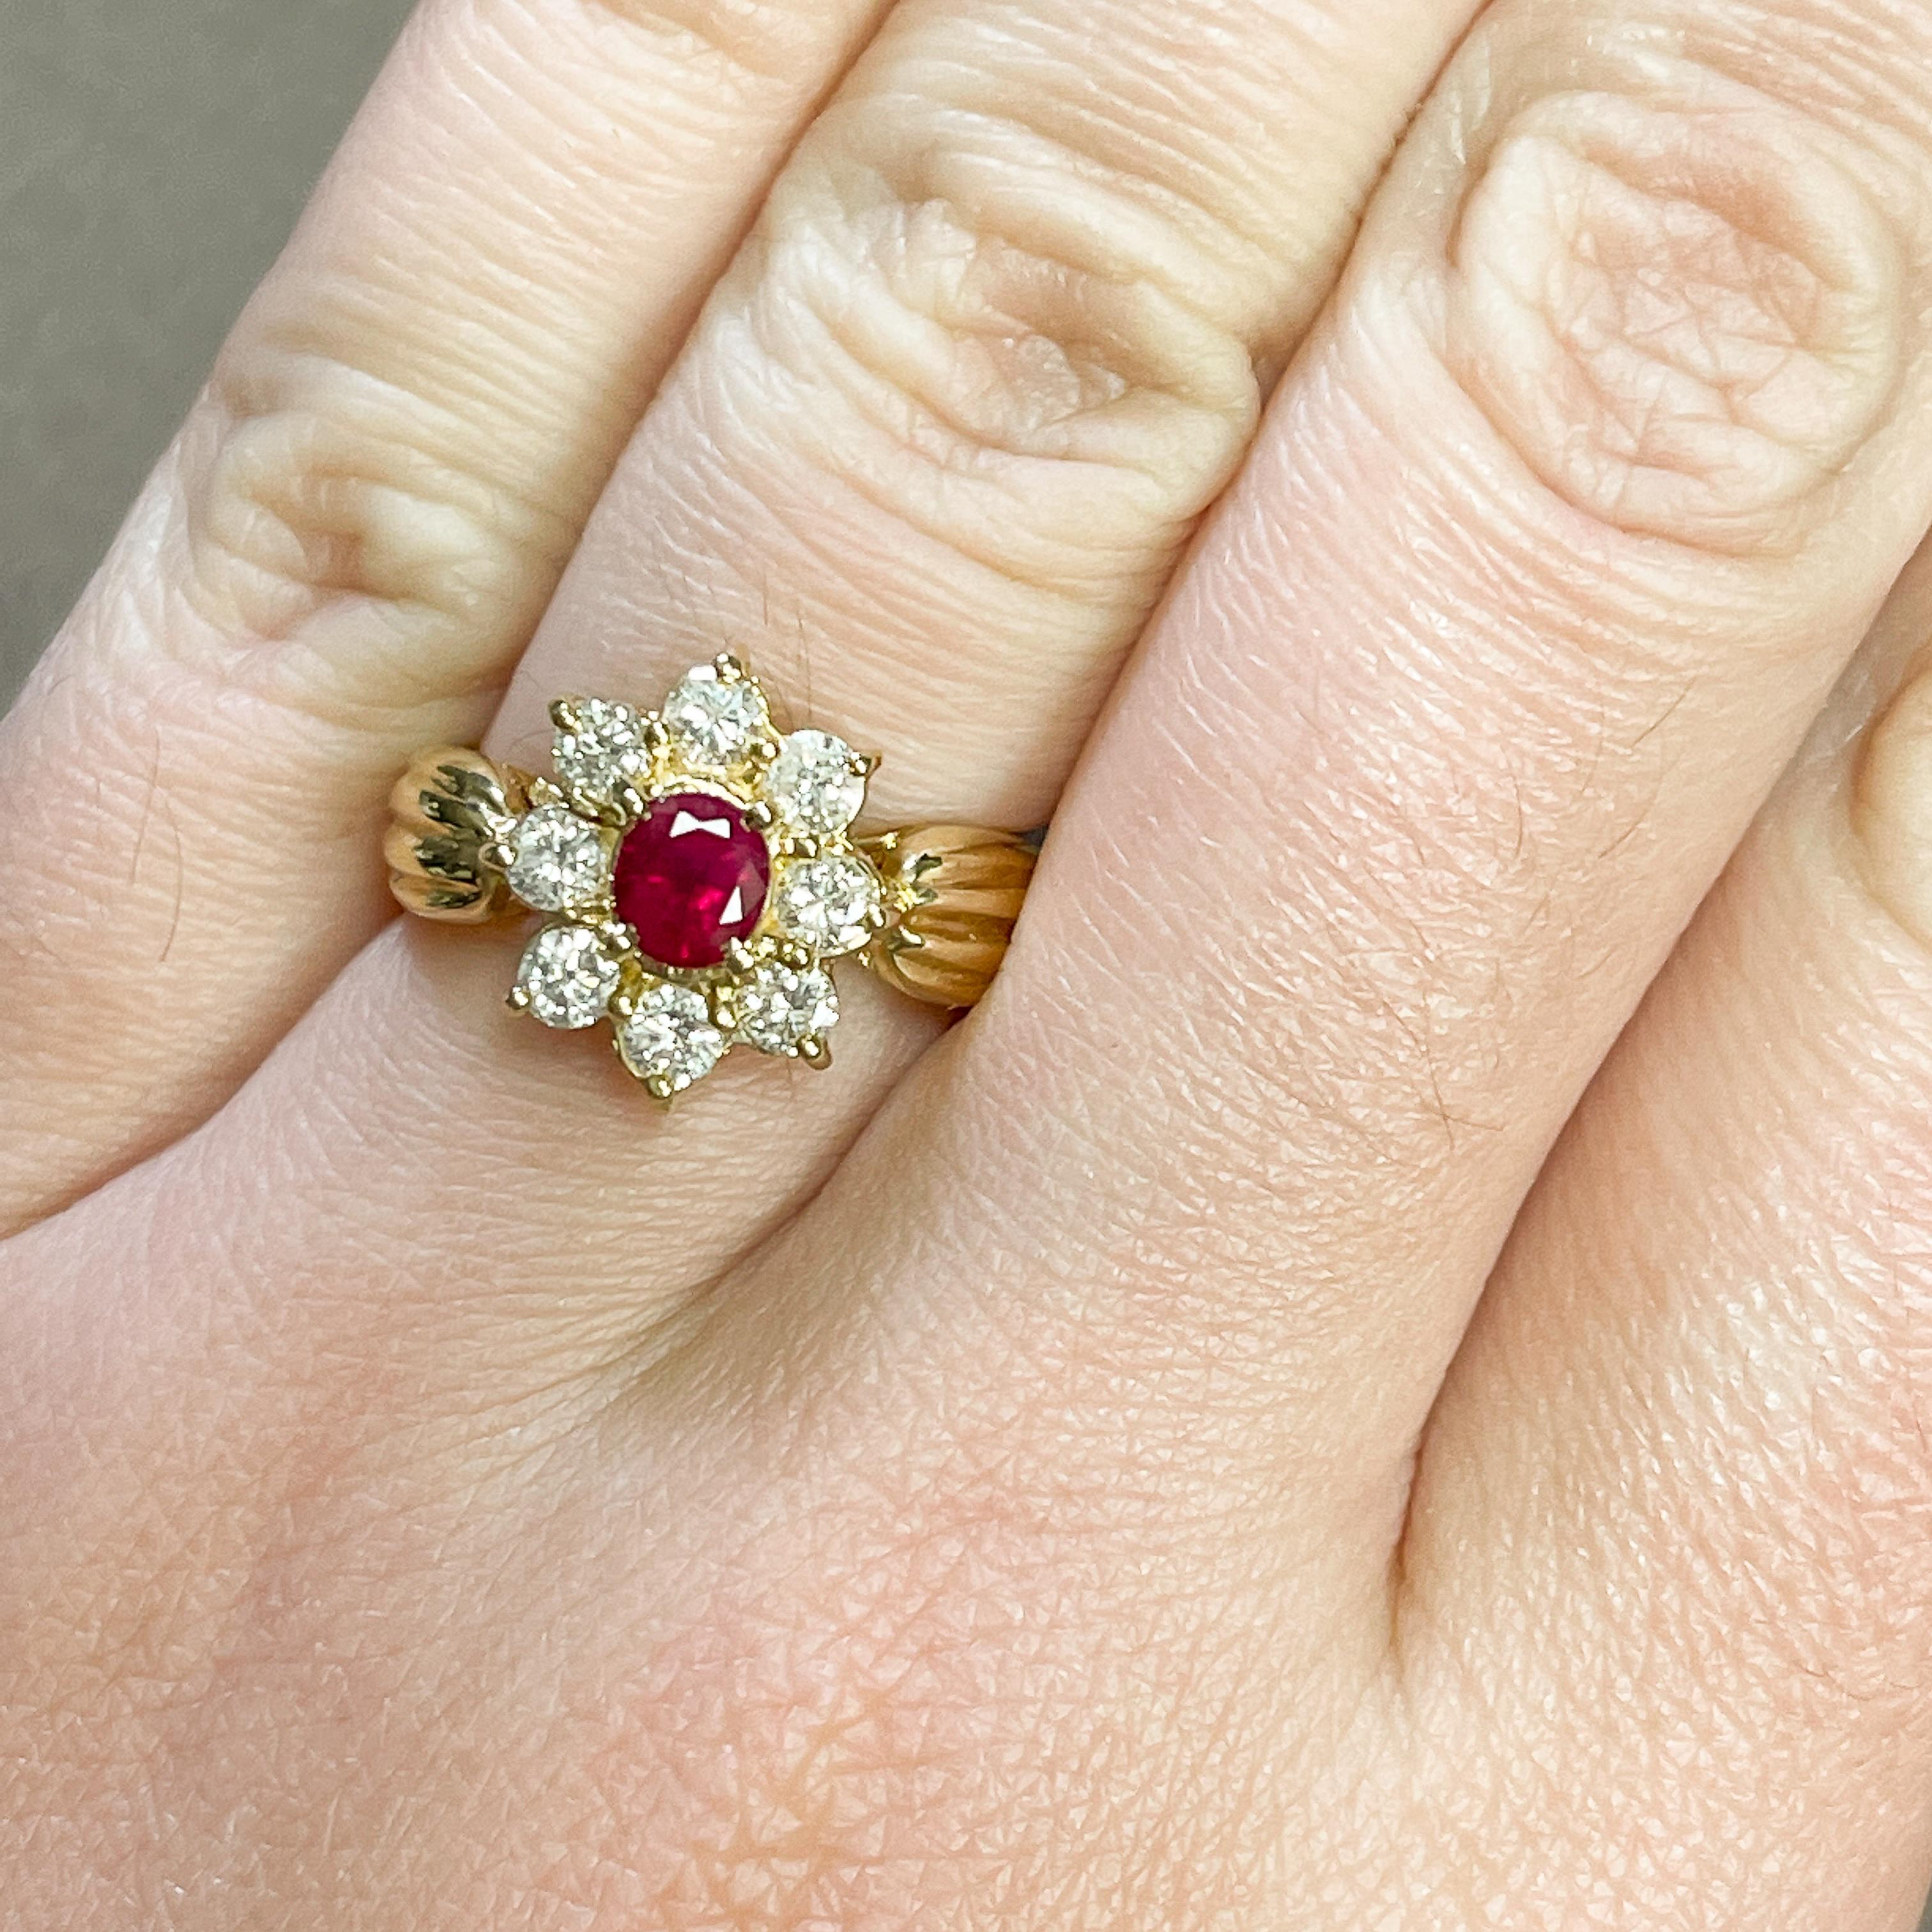 Beautiful women's floral ring! The ruby center is a deep red accented by 8 round cut diamonds. The yellow gold band has ridges like a floral stem. Rubies symbolize love, passion, and commitment. They are also the birthstone for July. 

• 18k Yellow